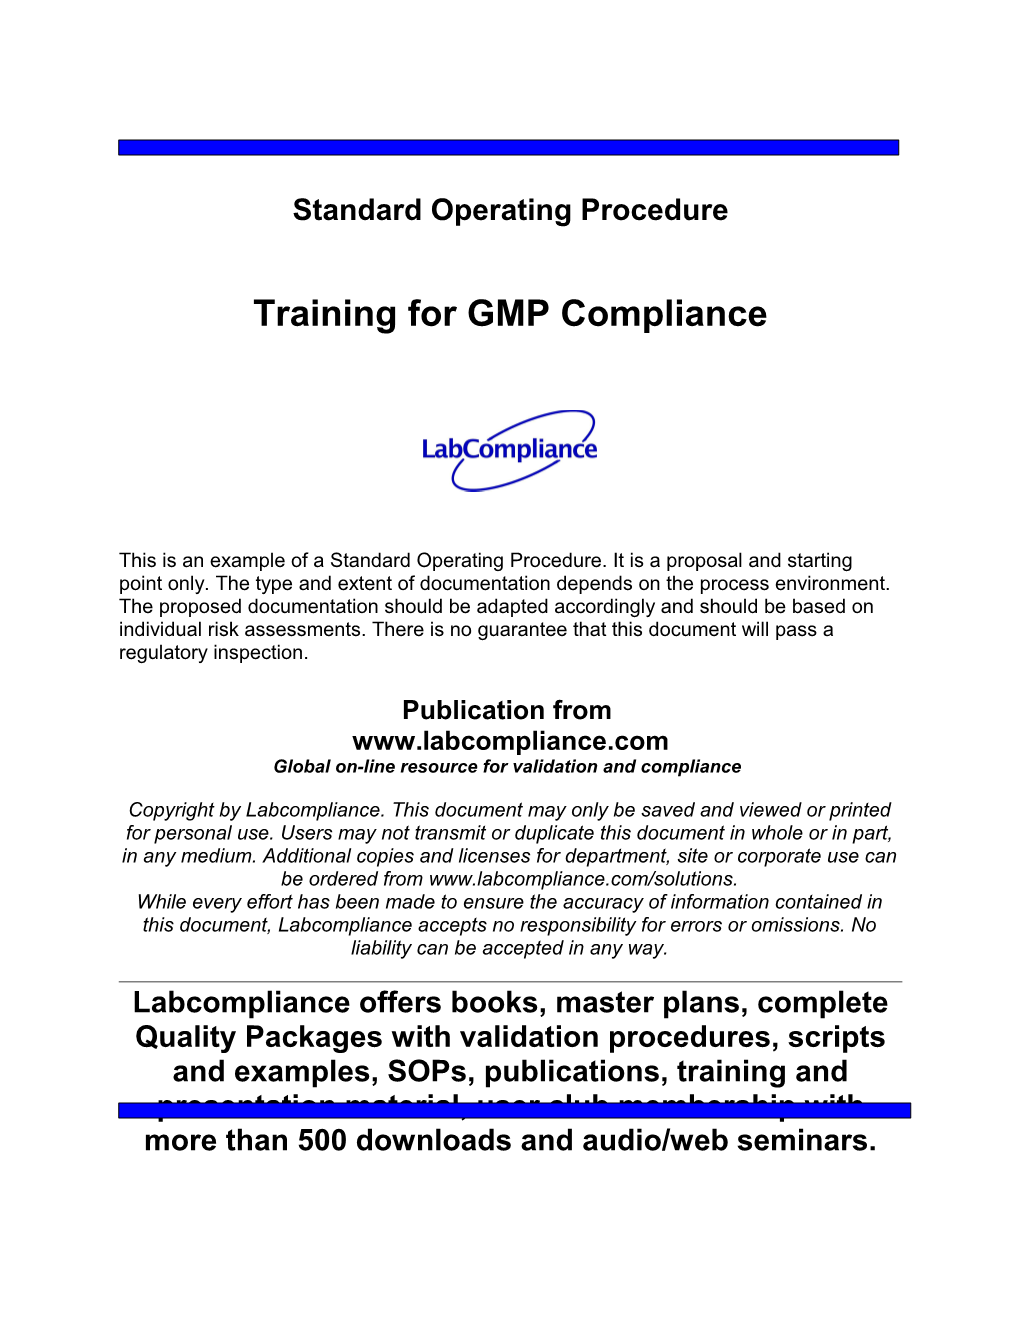 Training for GMP Compliance